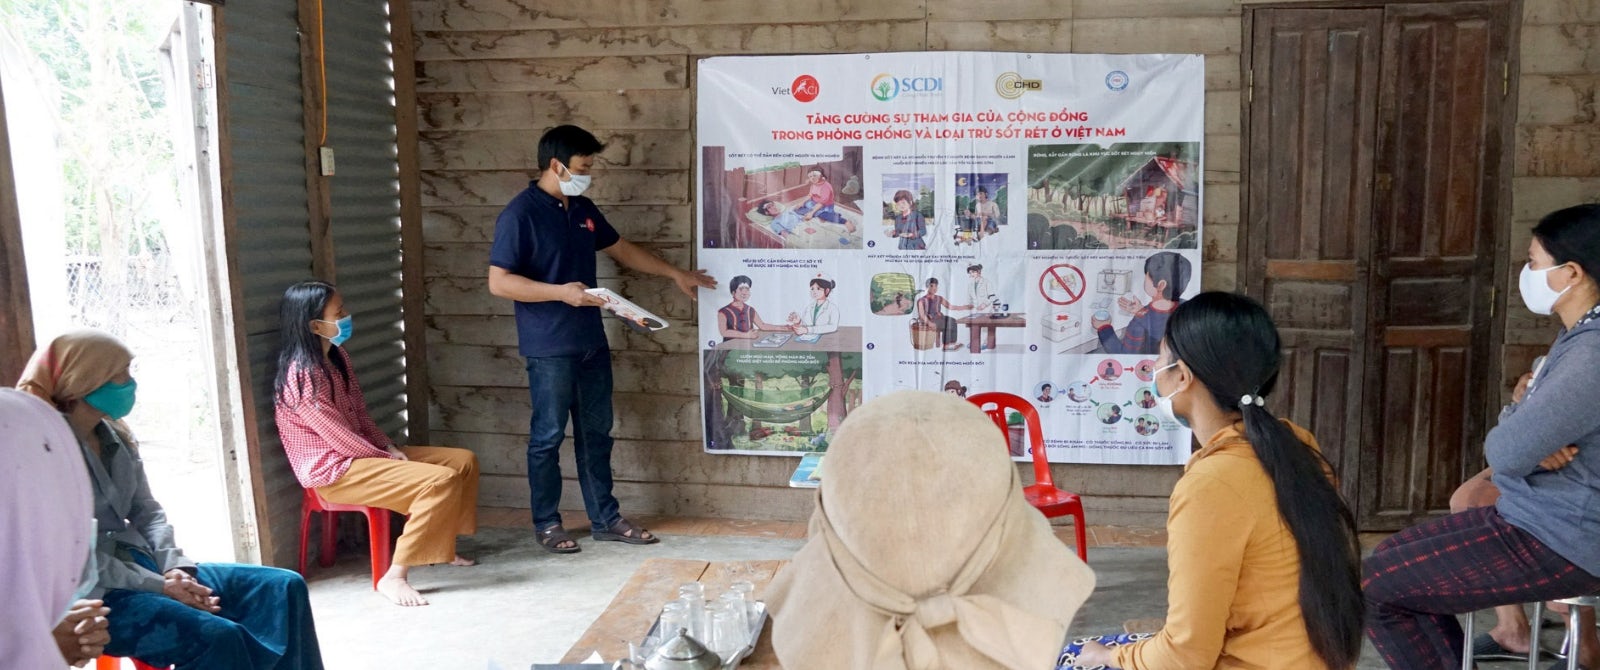 Hiao khanh's dedication to eliminating malaria in his vietnamese community who 2023